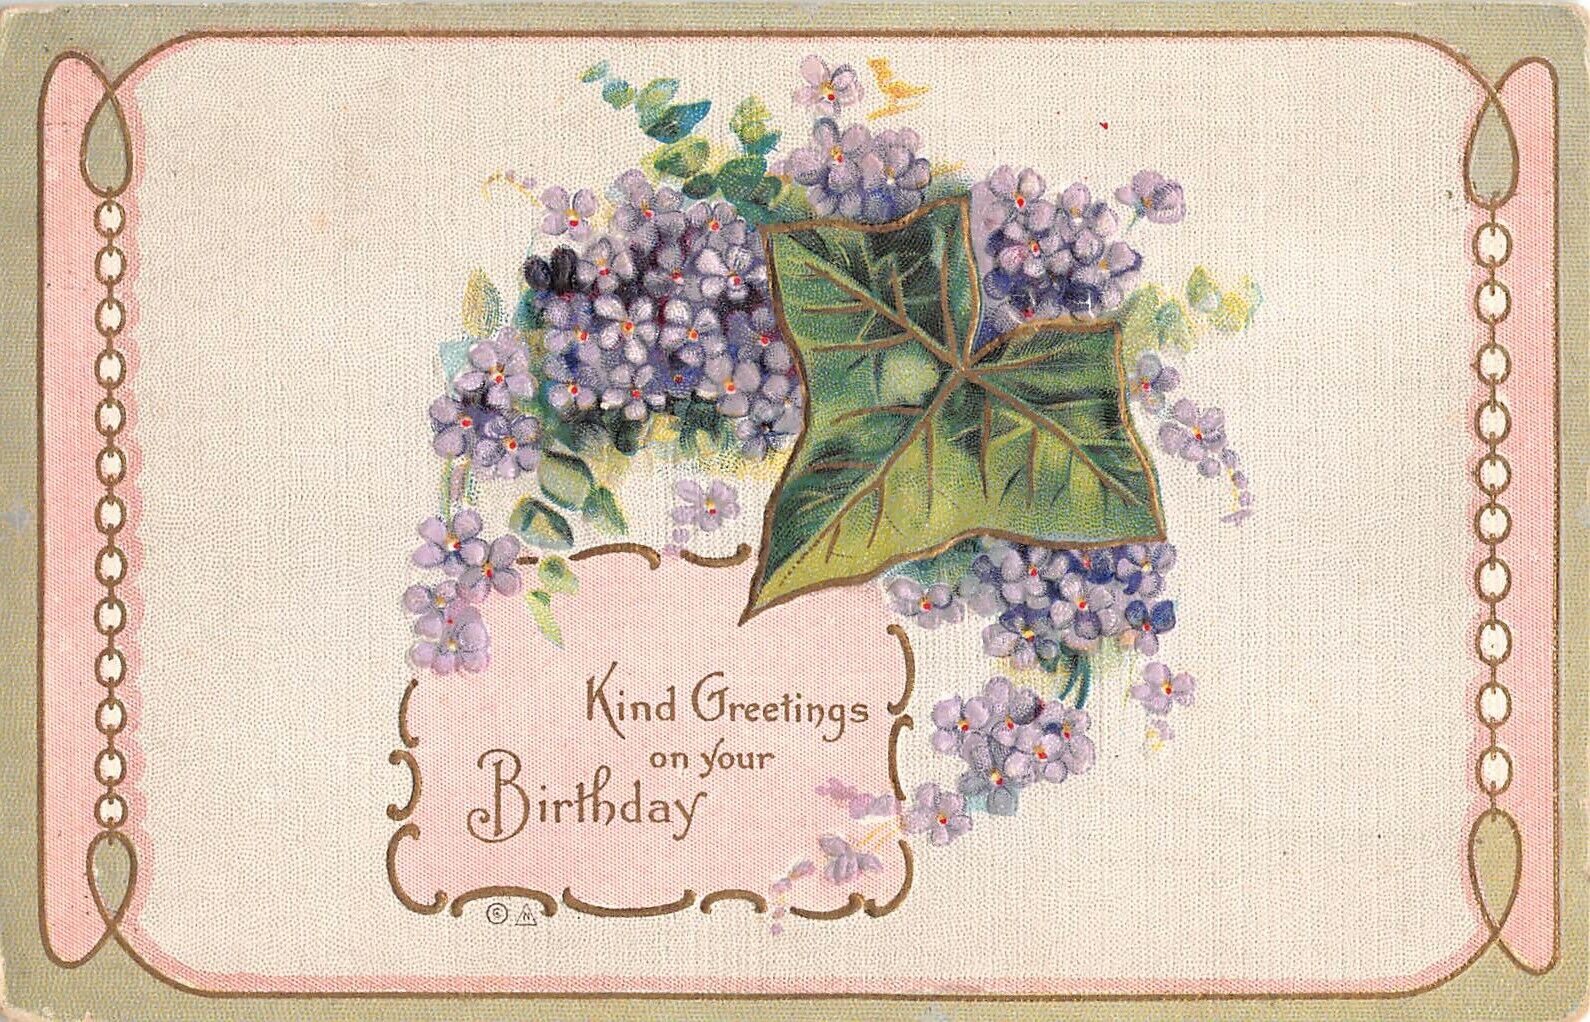 1912 Birthday Postcard of an Ivy Leaf With Lovely Violets